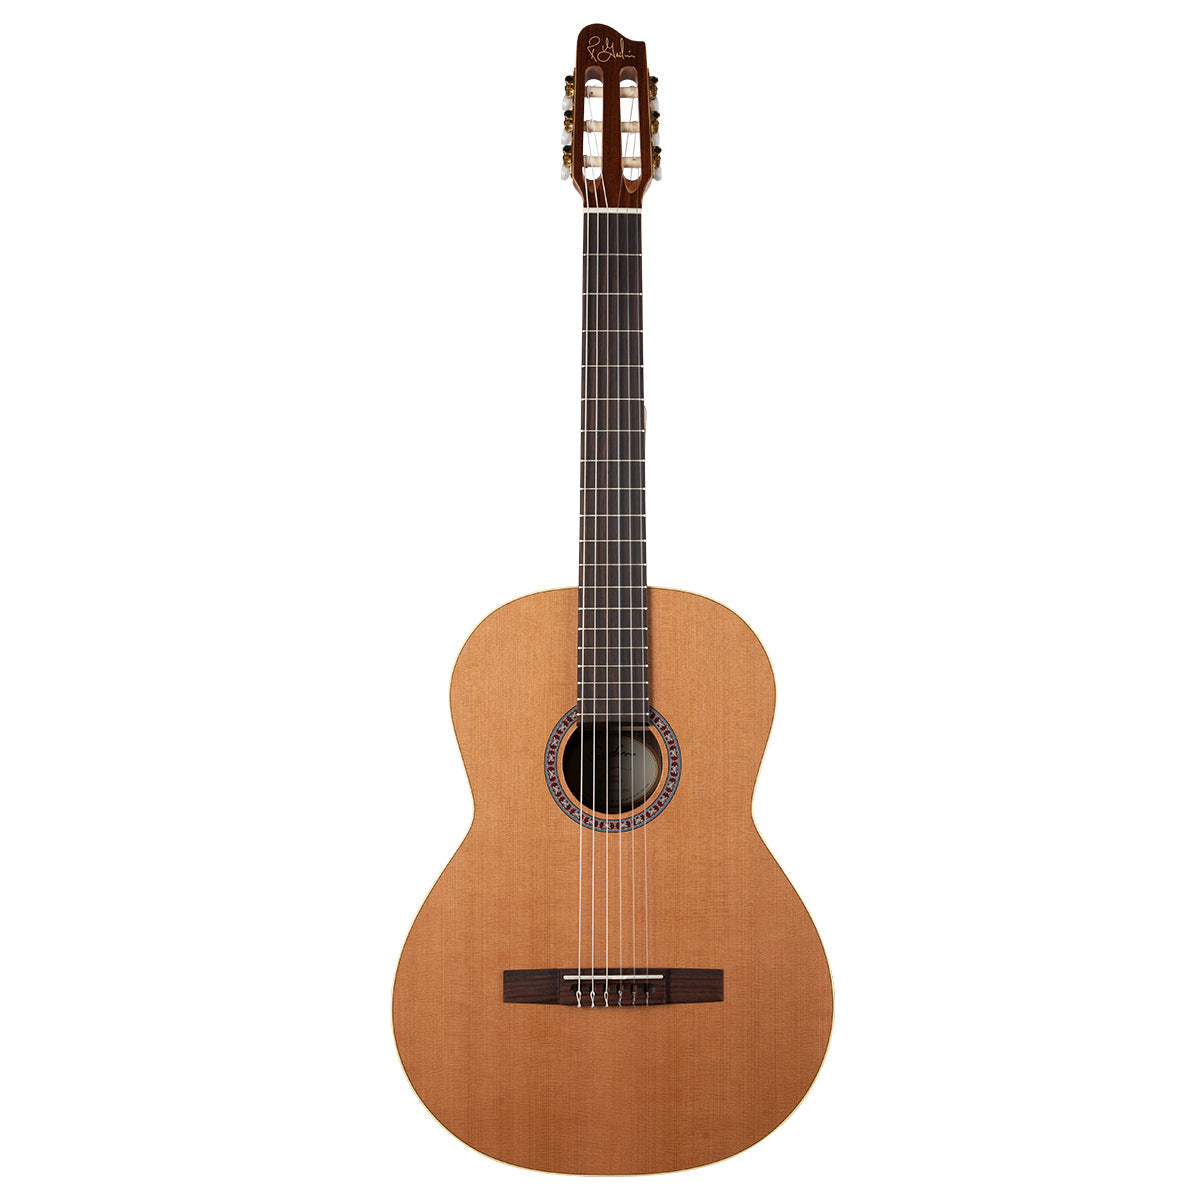 Godin Collection Clasica II Nylon String Electro Guitar,  for sale at Richards Guitars.